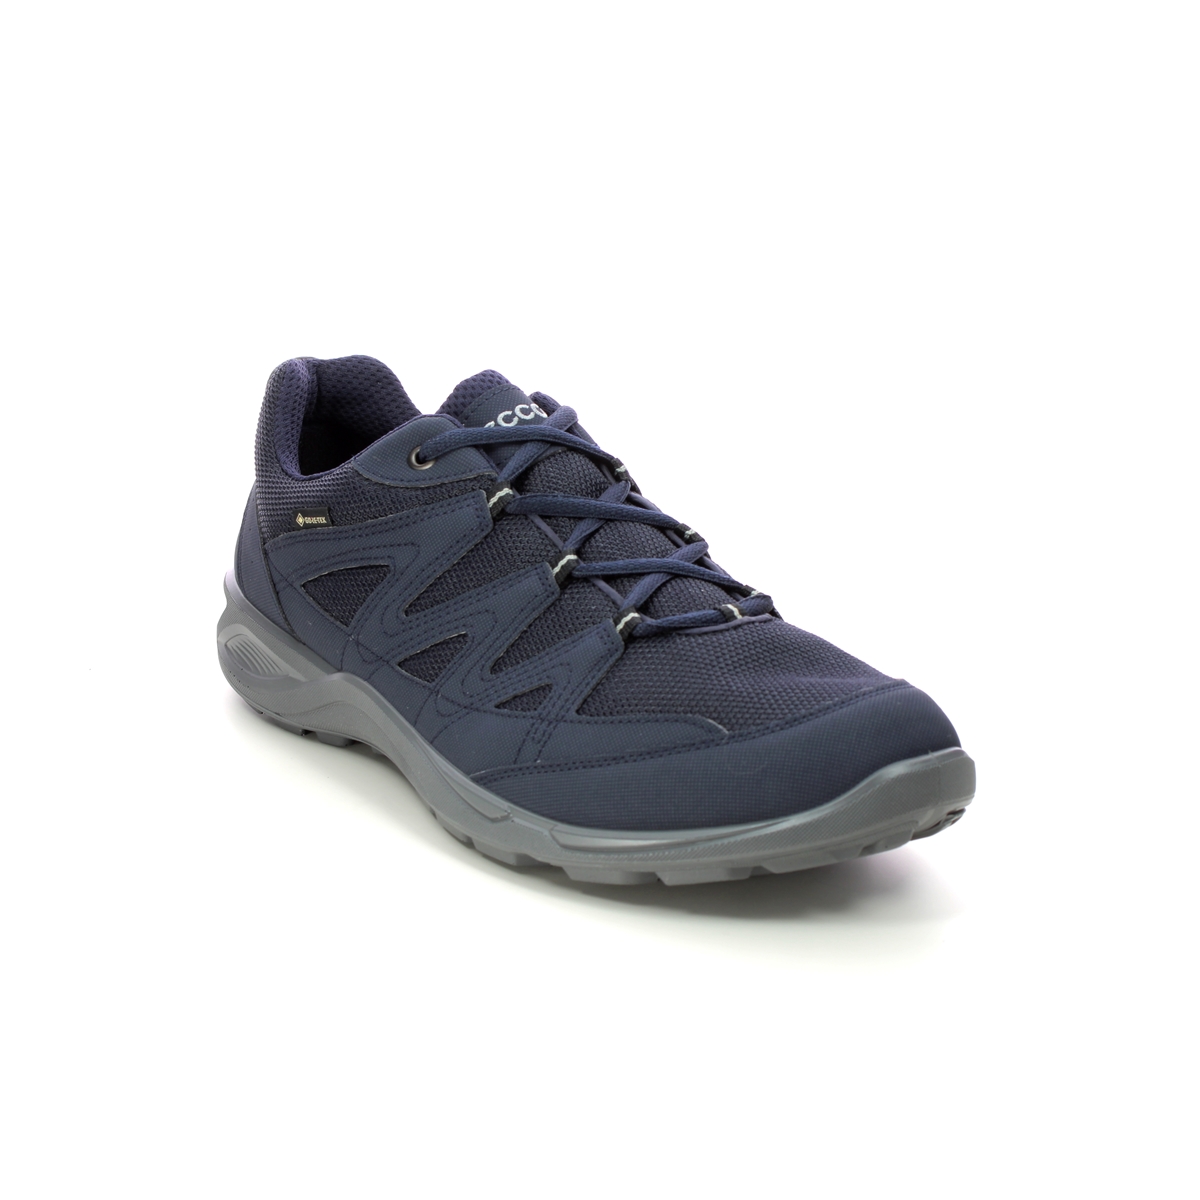 Ecco Terracruise Light Gtx Mens Navy Mens Trainers 825784-50769 In Size 47 In Plain Navy